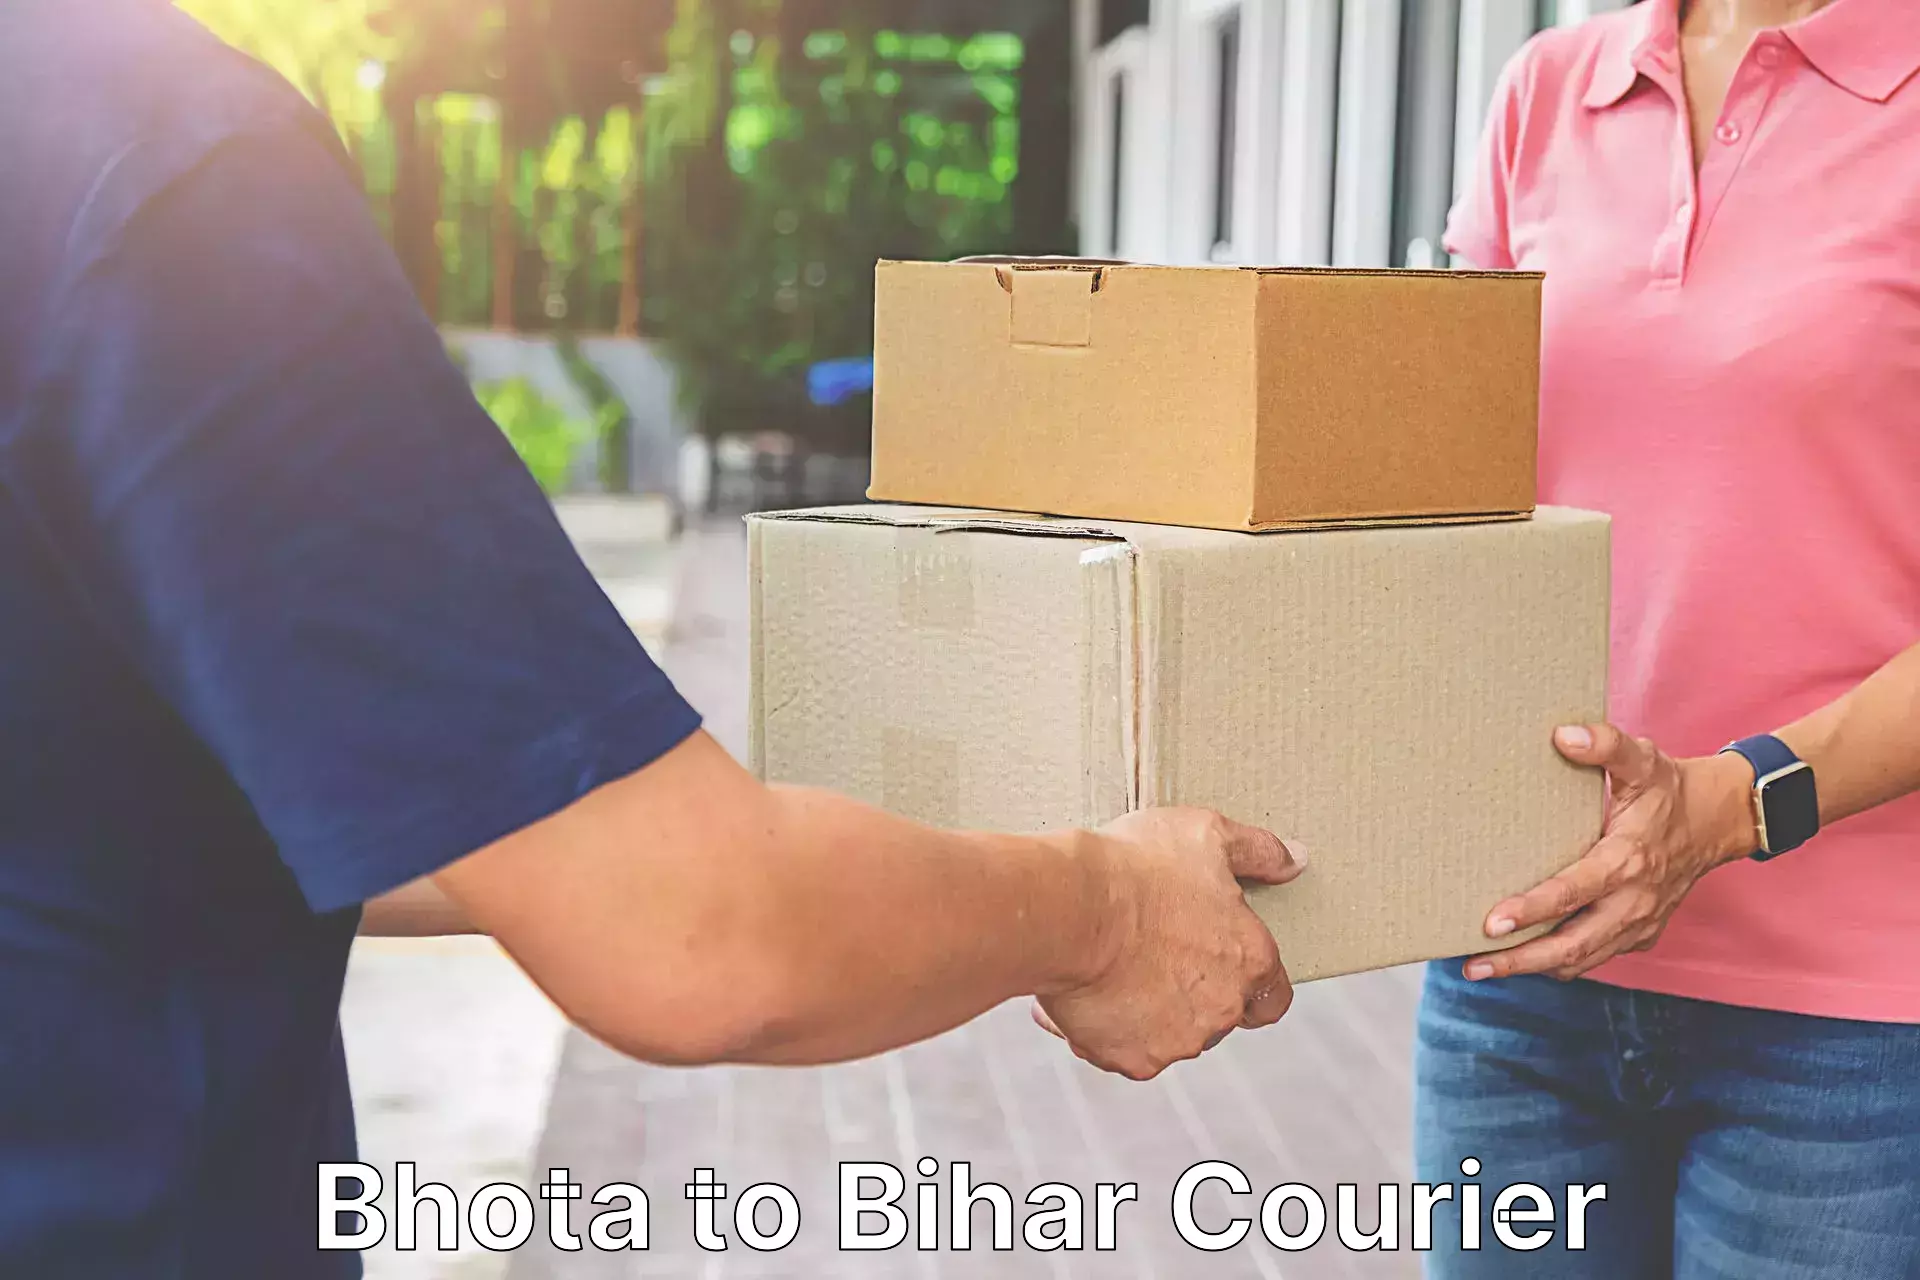 Efficient package consolidation Bhota to Bihar